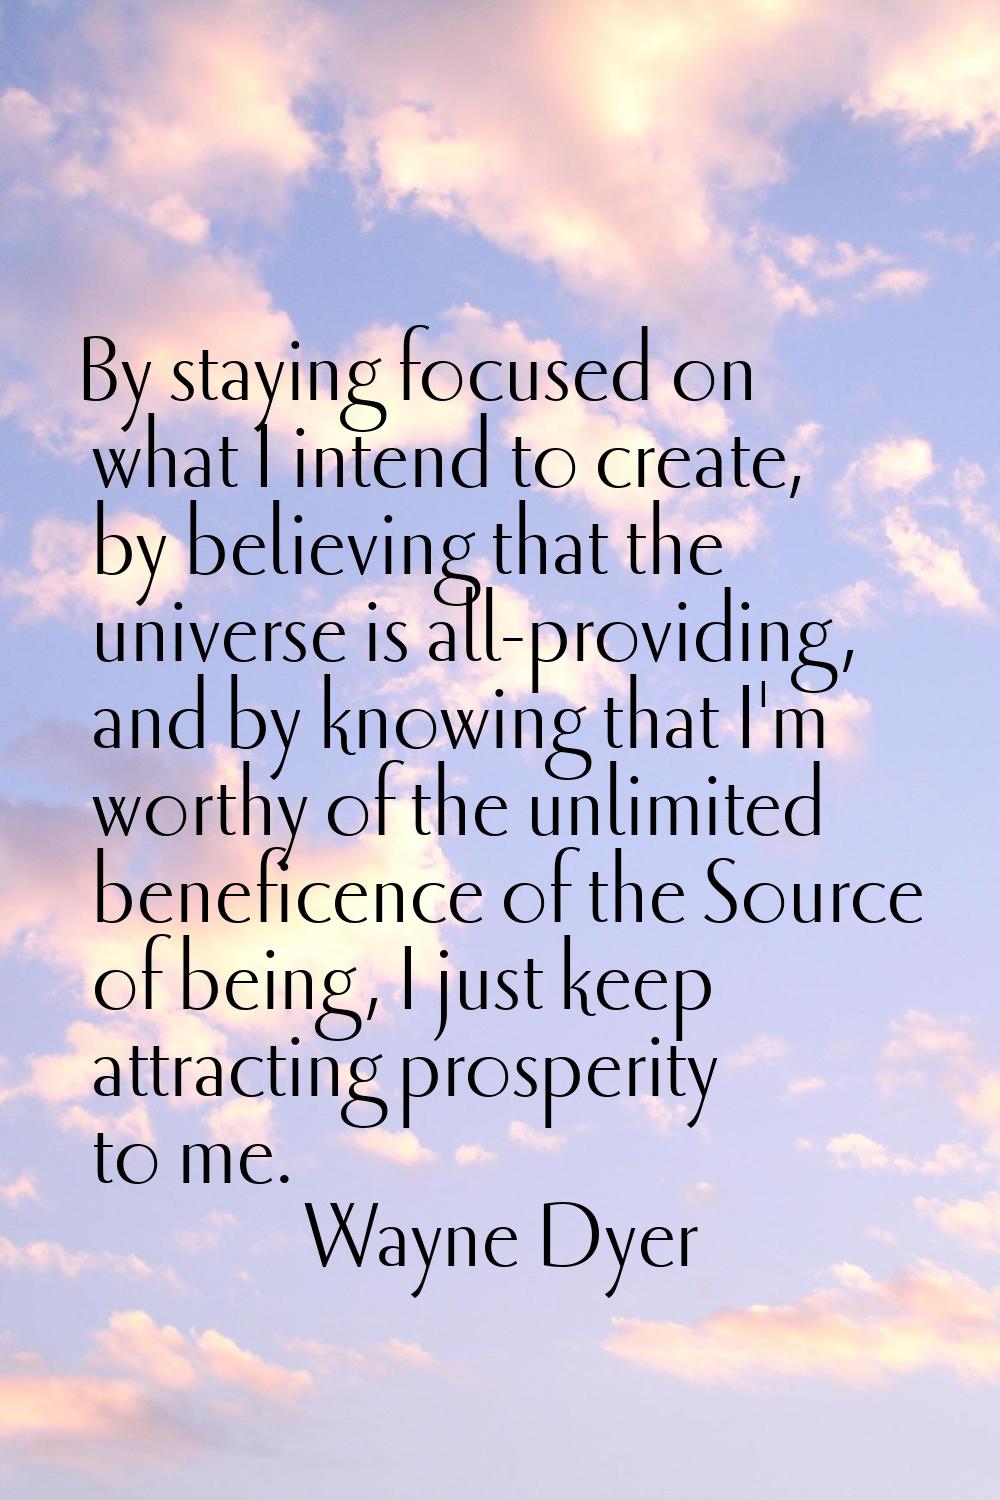 By staying focused on what I intend to create, by believing that the universe is all-providing, and